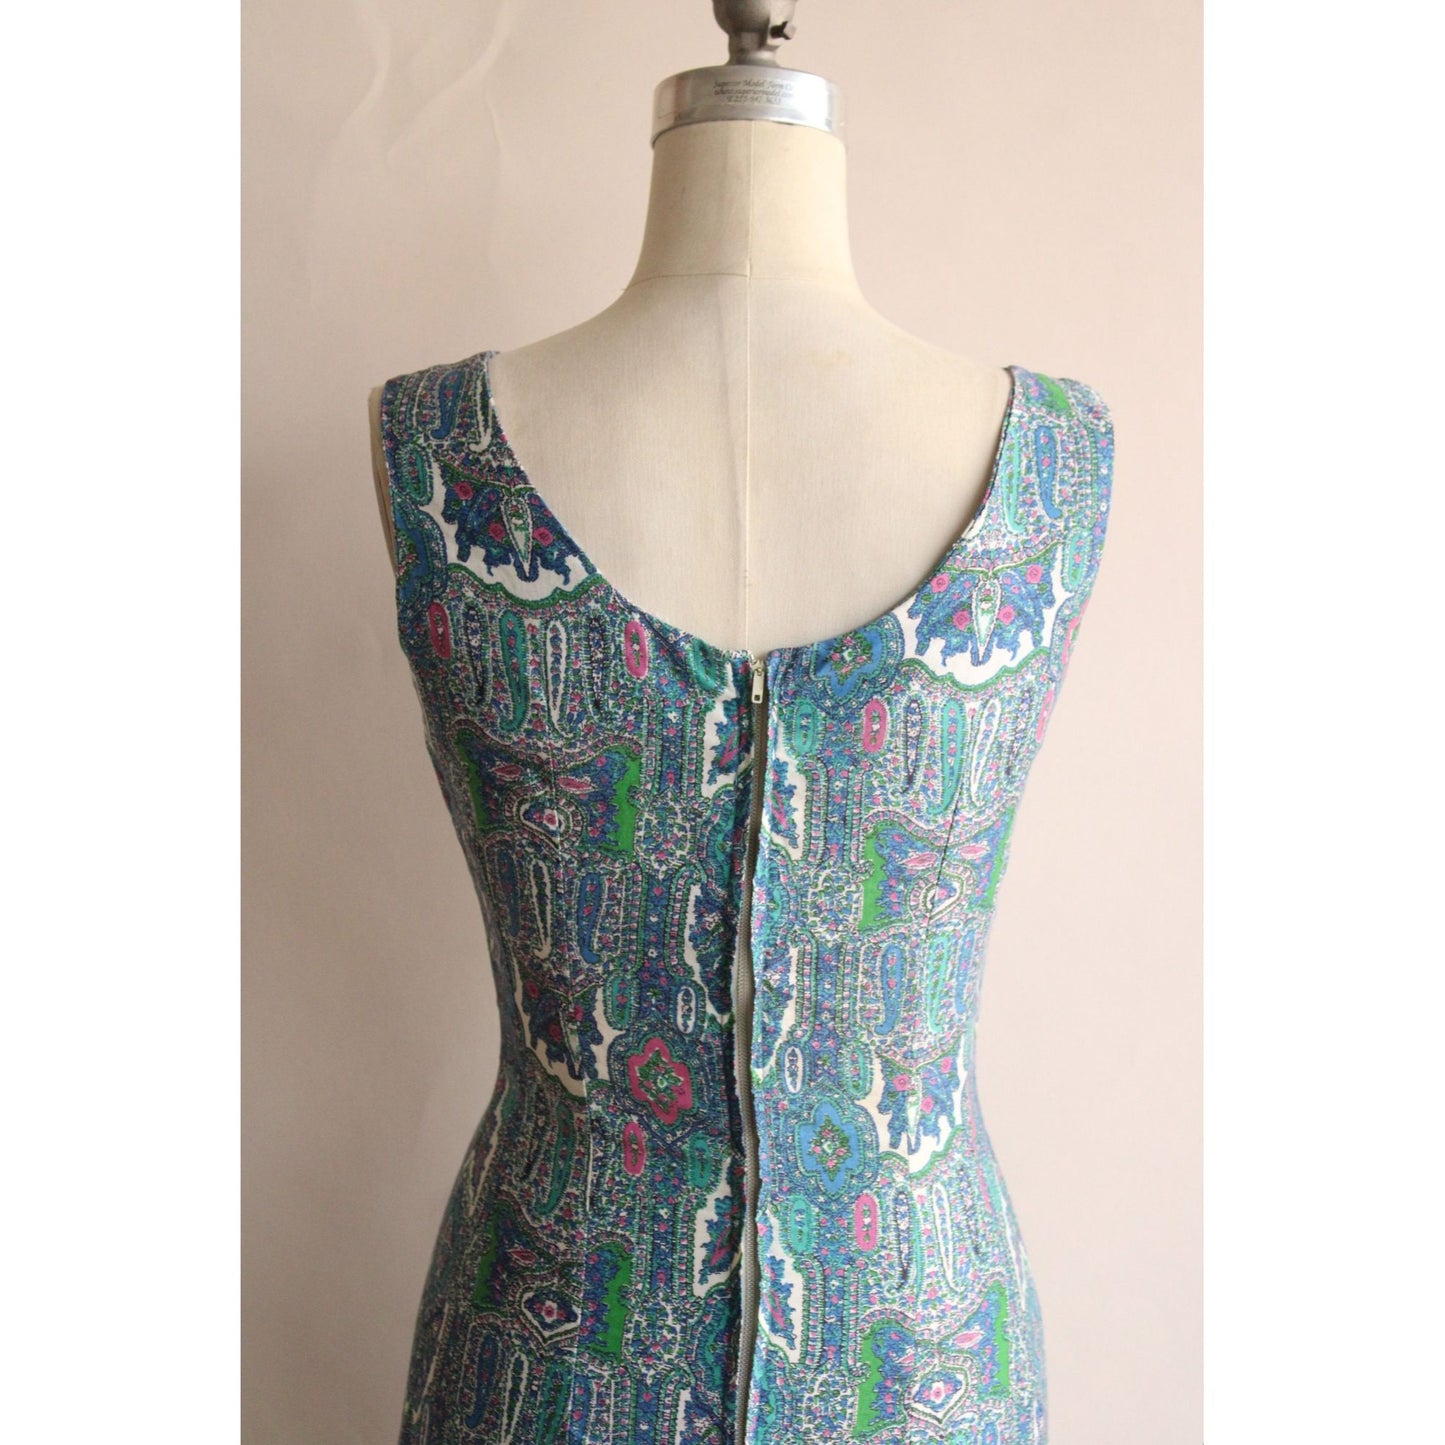 Vintage 1950s Wiggle Dress in a Blue Paisley Print